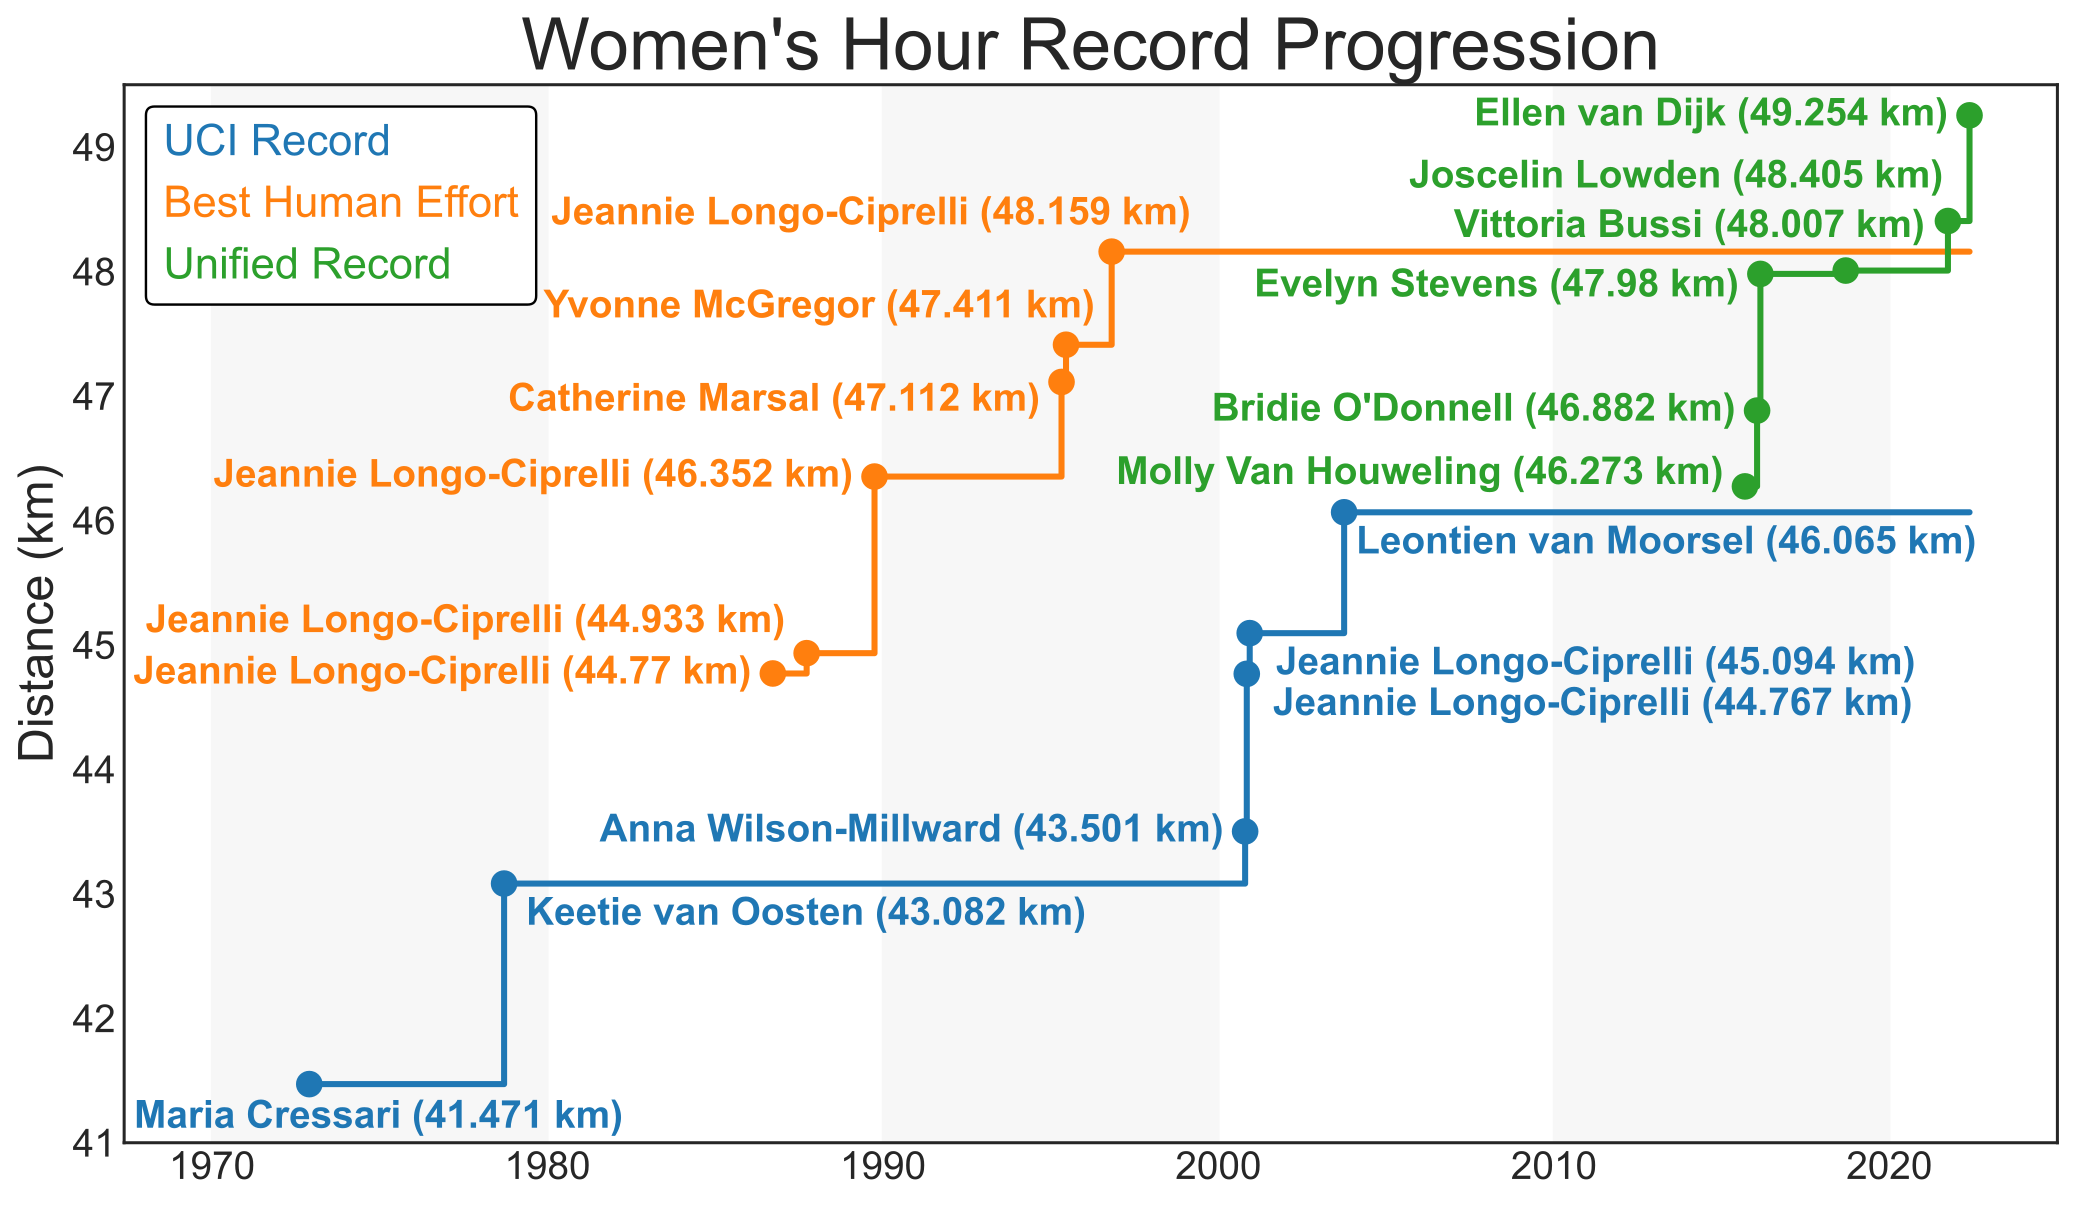 The above chart depicts the progression of the women's hour record over time (click to enlarge). Blue markers indicate attempts made under the UCI hour record, orange markers indicate attempts made under the UCI best human effort rules, and green markers indicate attempts made under the unified rules.